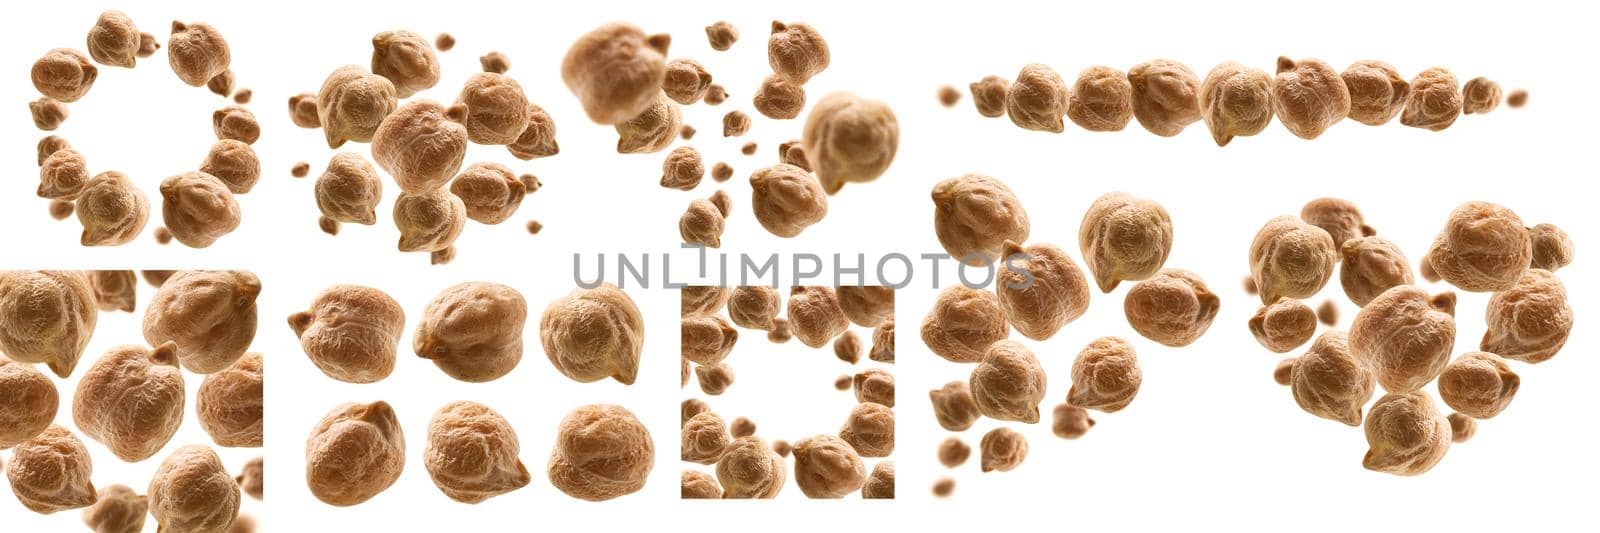 A set of photos. Ripe chickpeas levitate on a white background.